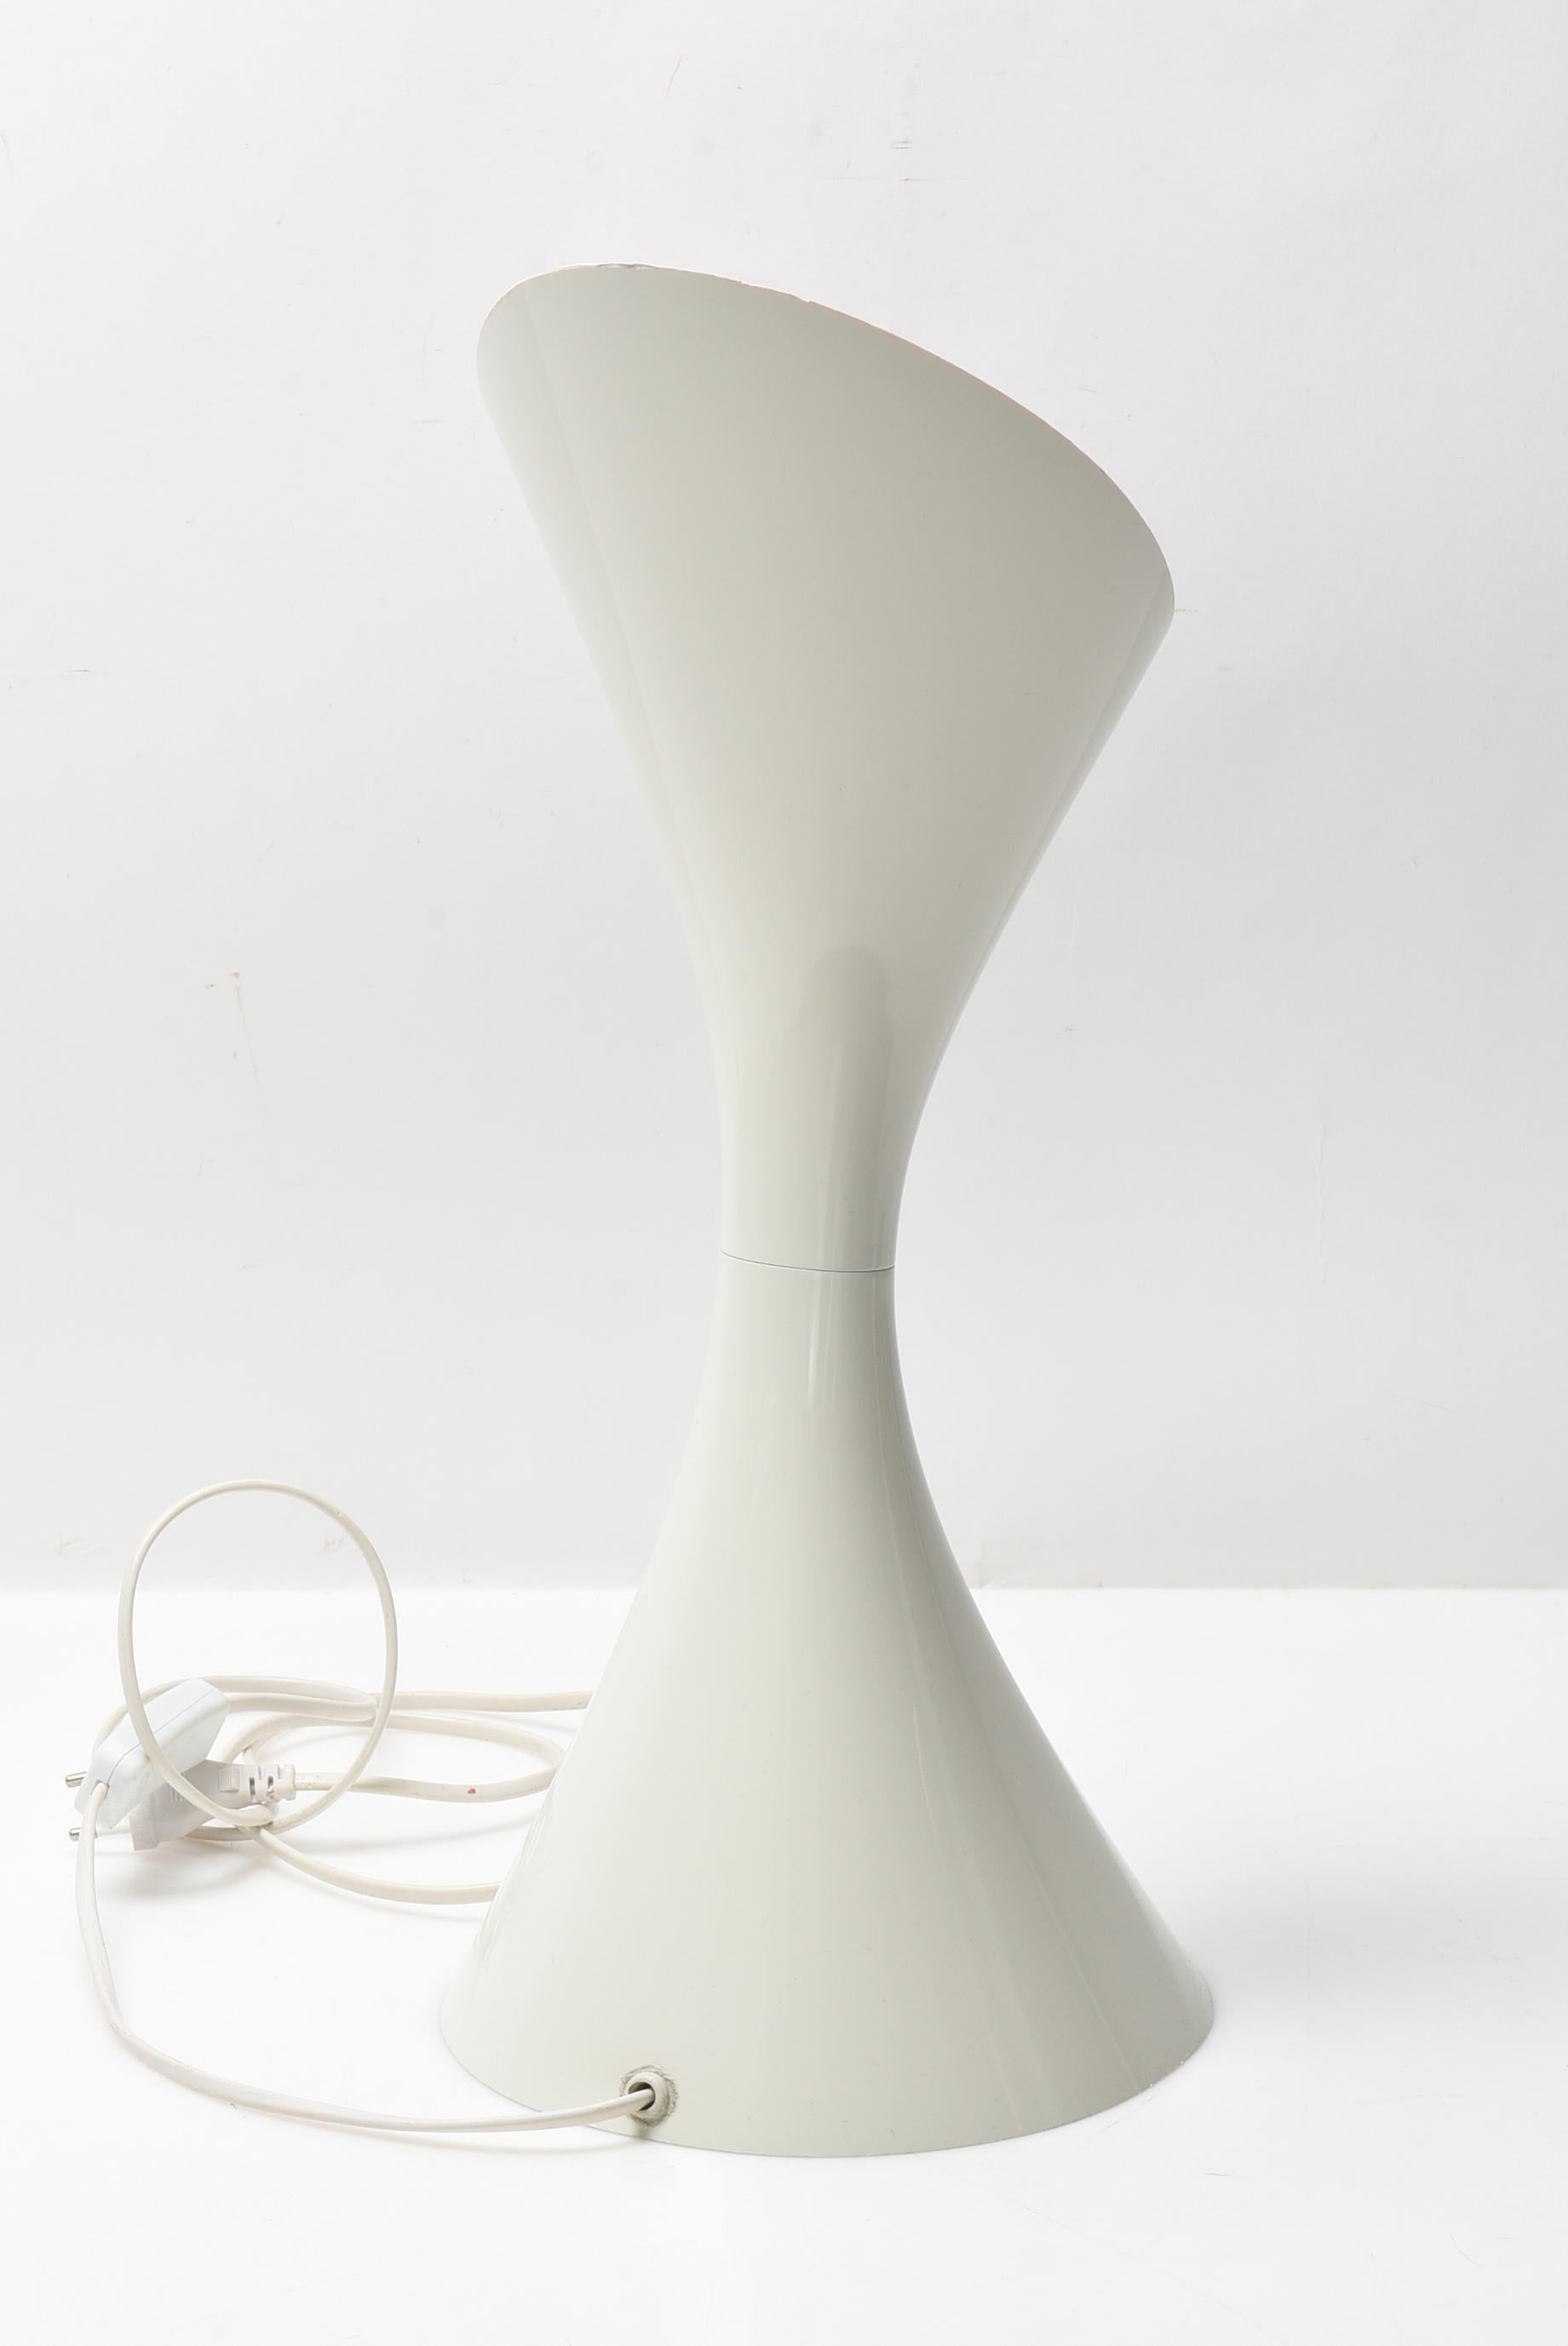 Modernist in its clean lines. Great to light up a corner or on a console. This lamp was designed by Jenny Keate for Weave in 1999. 100 productions of different colors were created in the same year. Later in 2001, a final production of only 2000